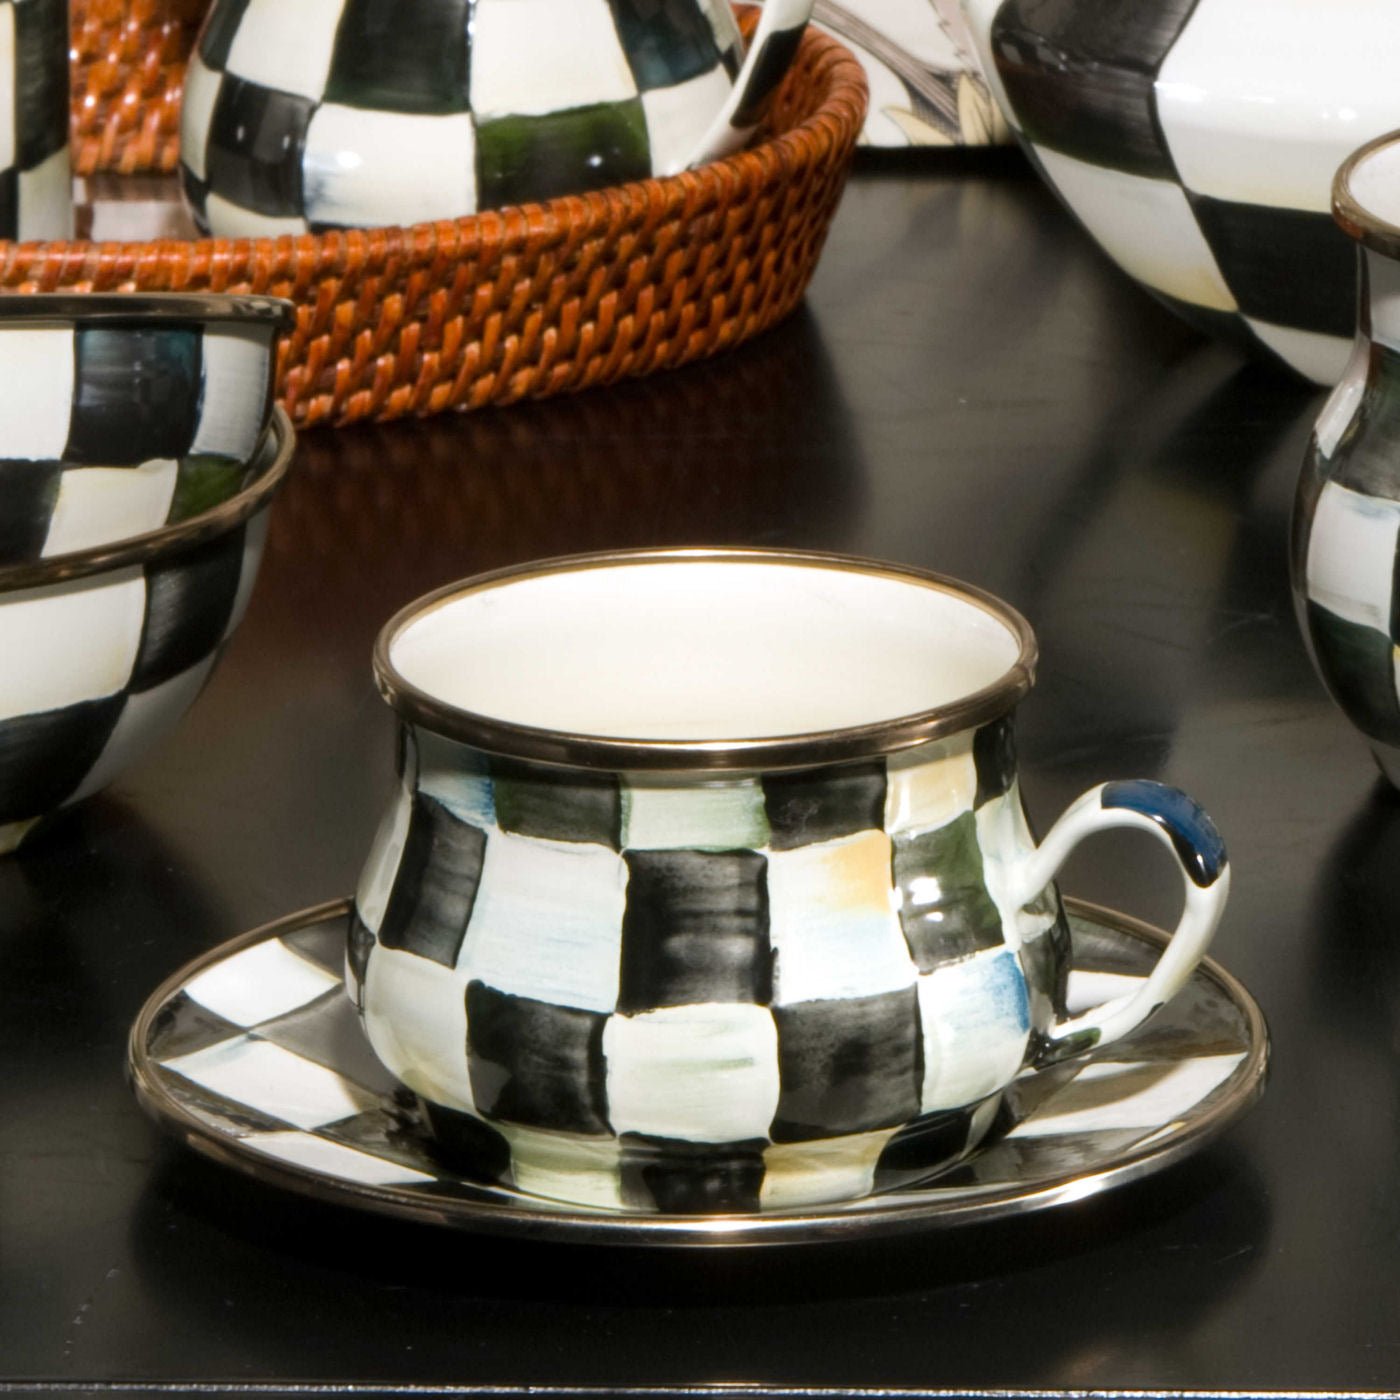 MacKenzie-Childs Courtly Check Enamel Teacup - |VESIMI Design| Luxury Bathrooms and Home Decor